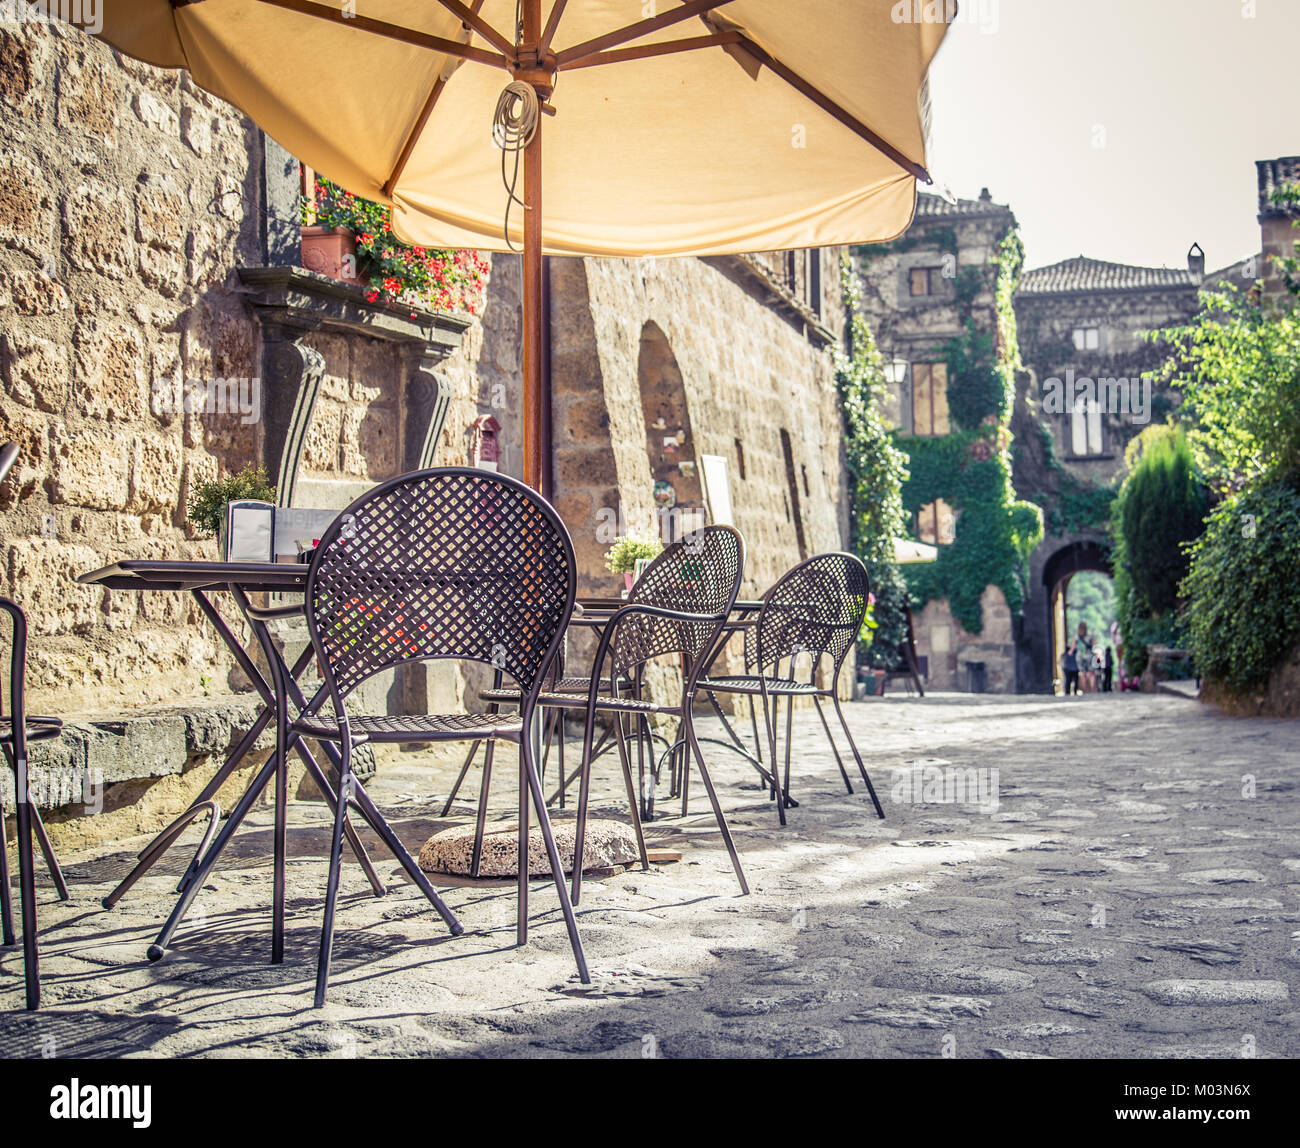 Cafe with tables and chairs in an old street in Europe with retro vintage Instagram style filter effect Stock Photo